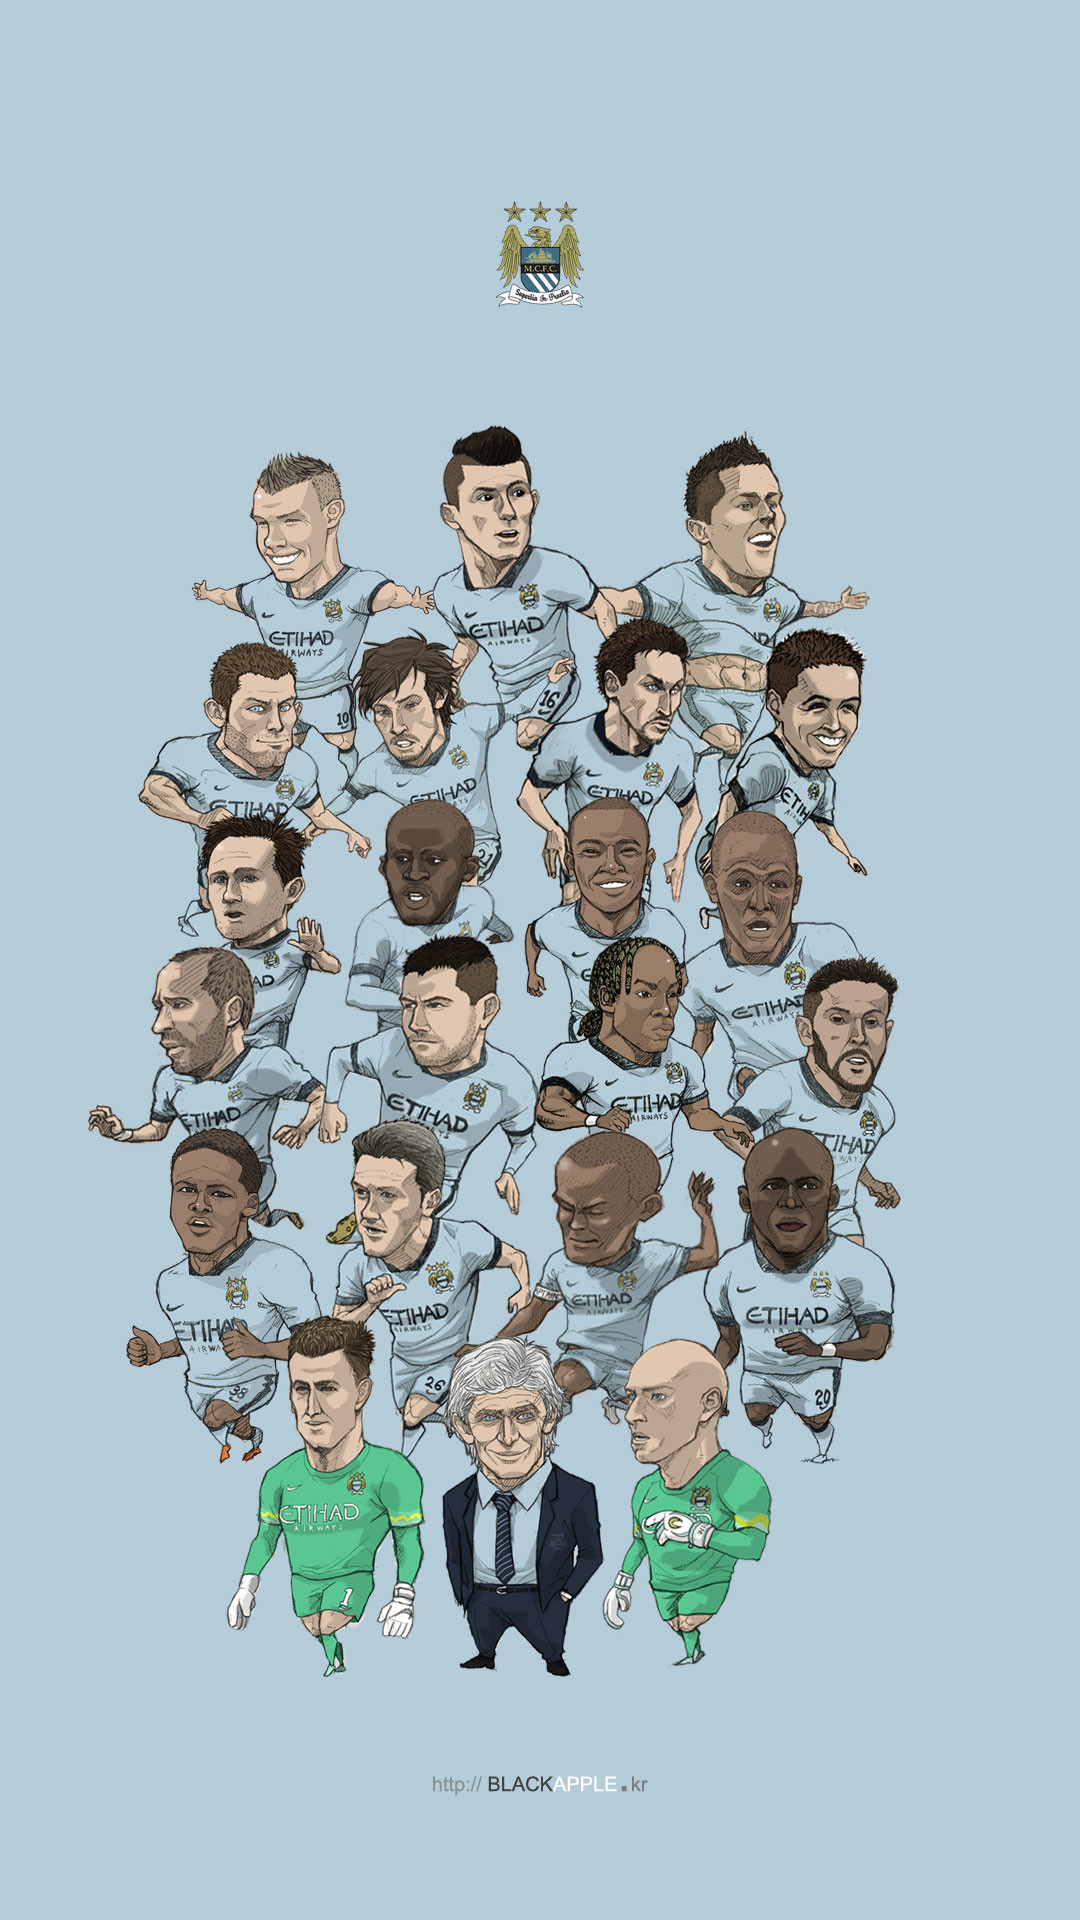 1080x1920 Manchester city fan art for mobile wallpaper All squad in 2014-2015 first  half season